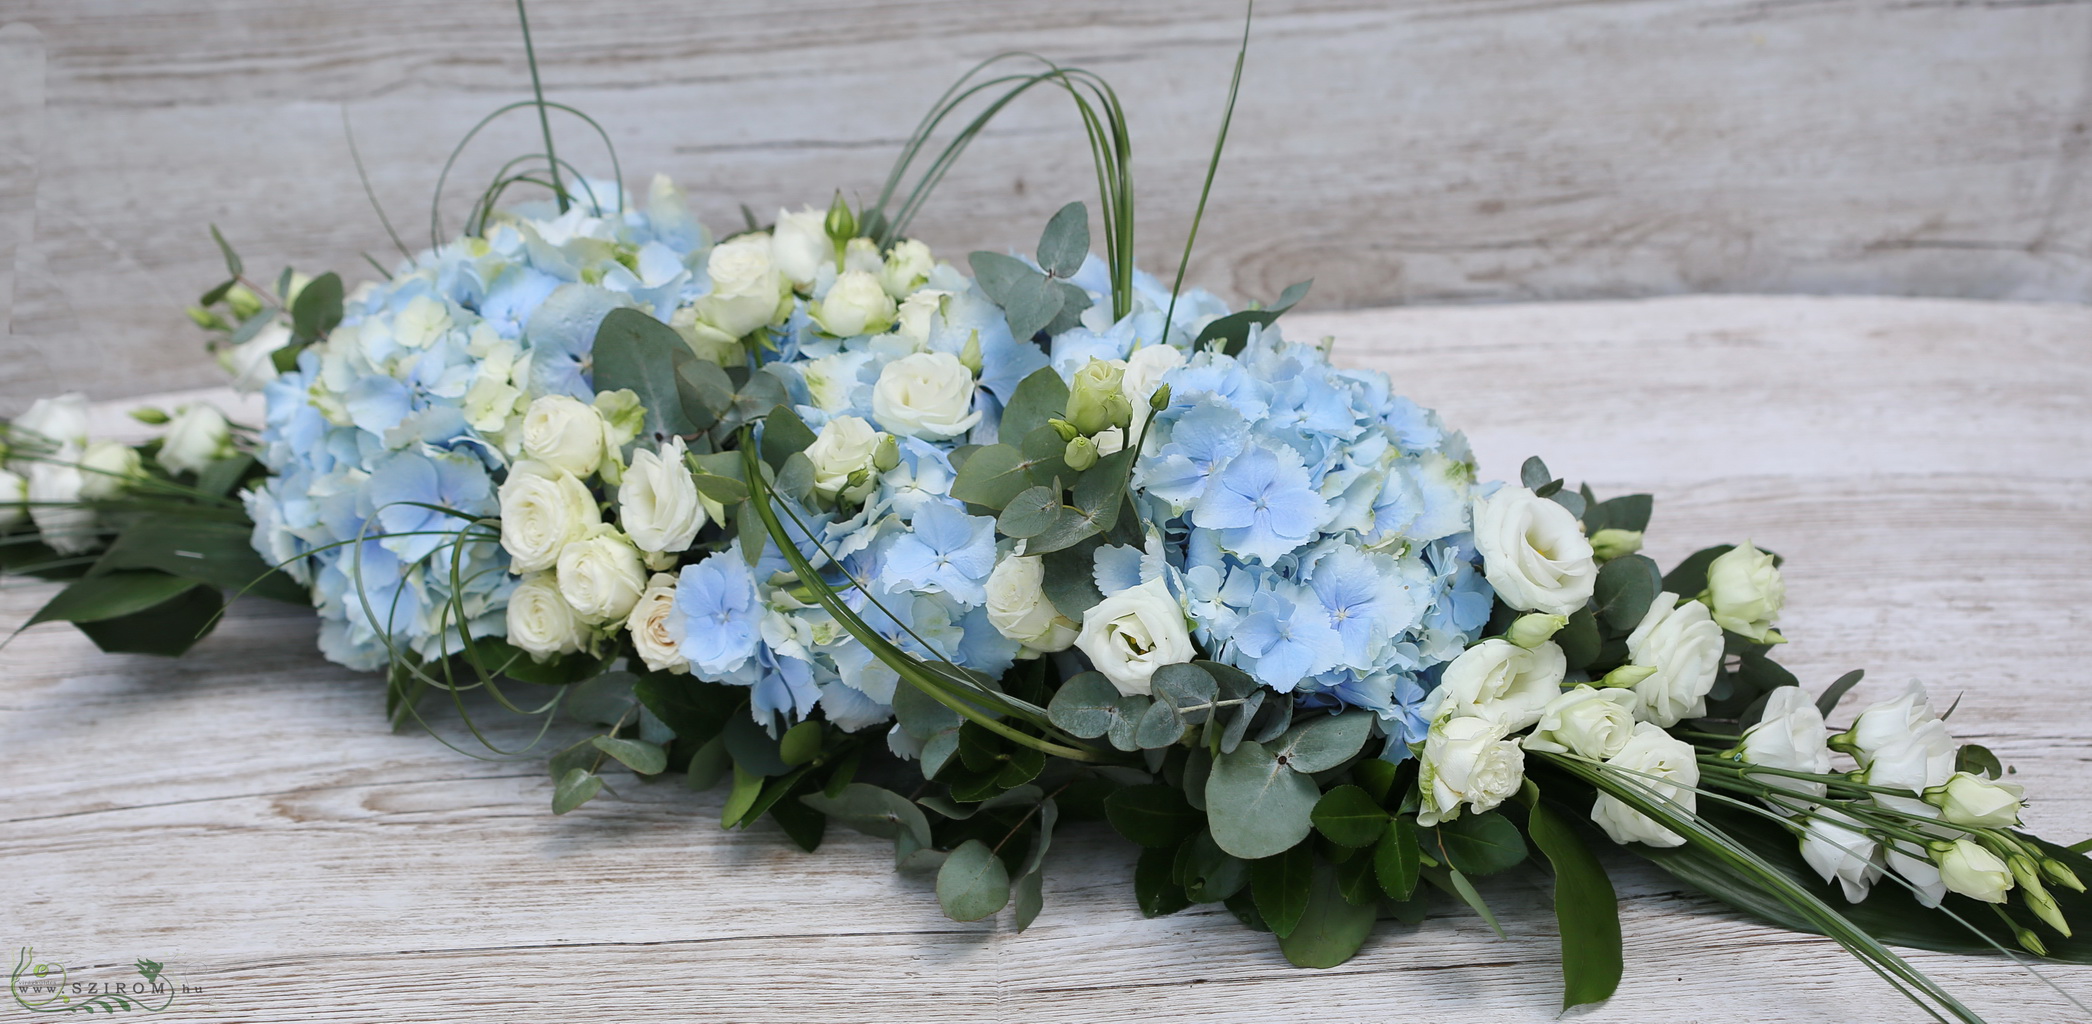 flower delivery Budapest - Main table centerpiece (blue hydrangea, white rose, lisianthus), wedding